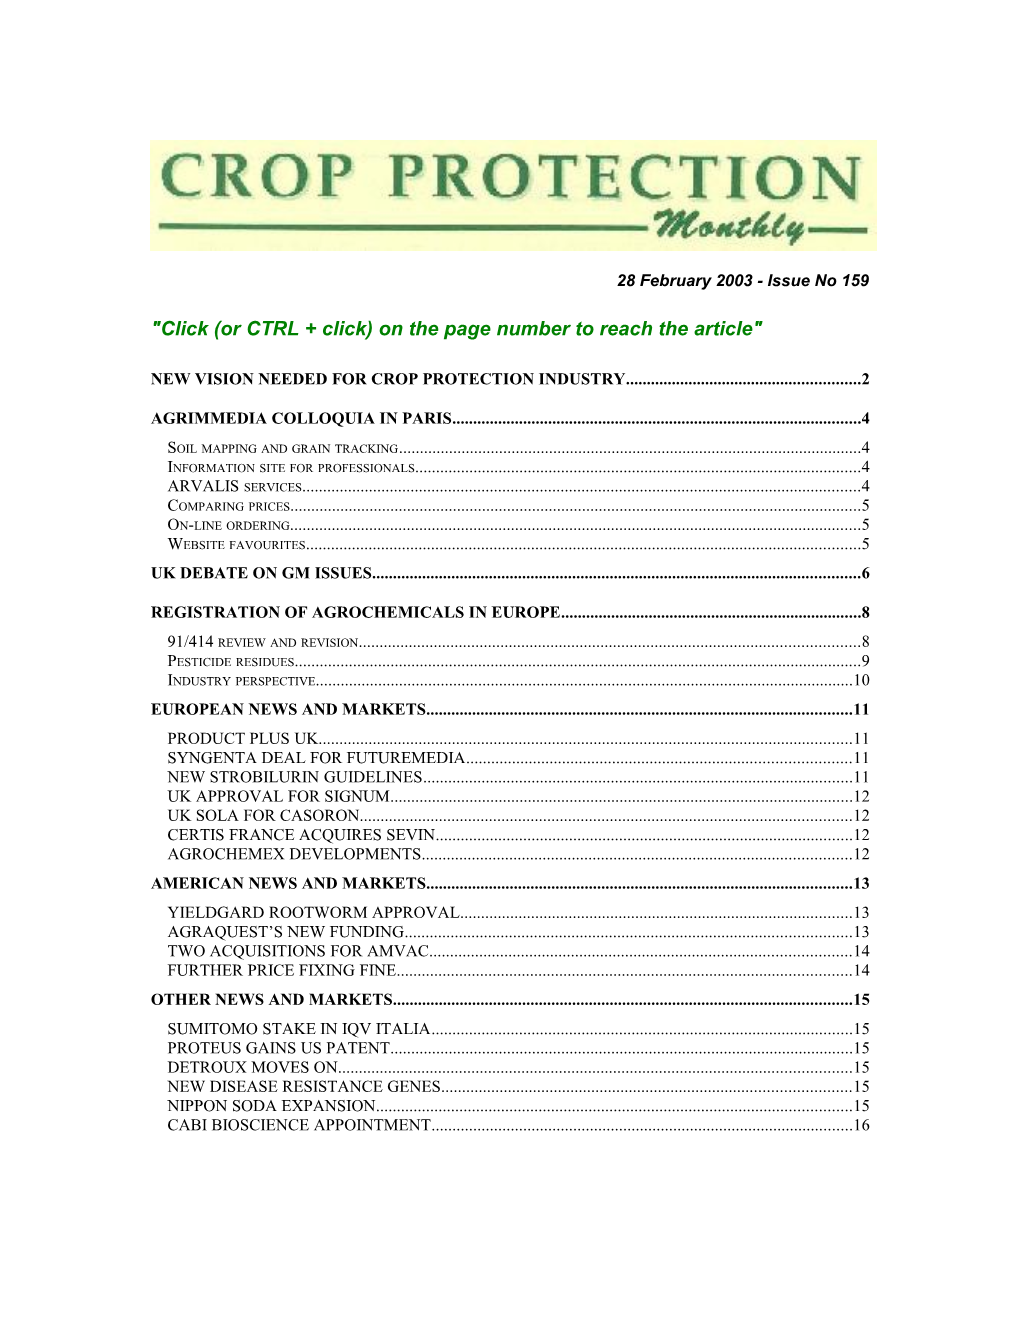 Crop Protection Monthly by E-Mail